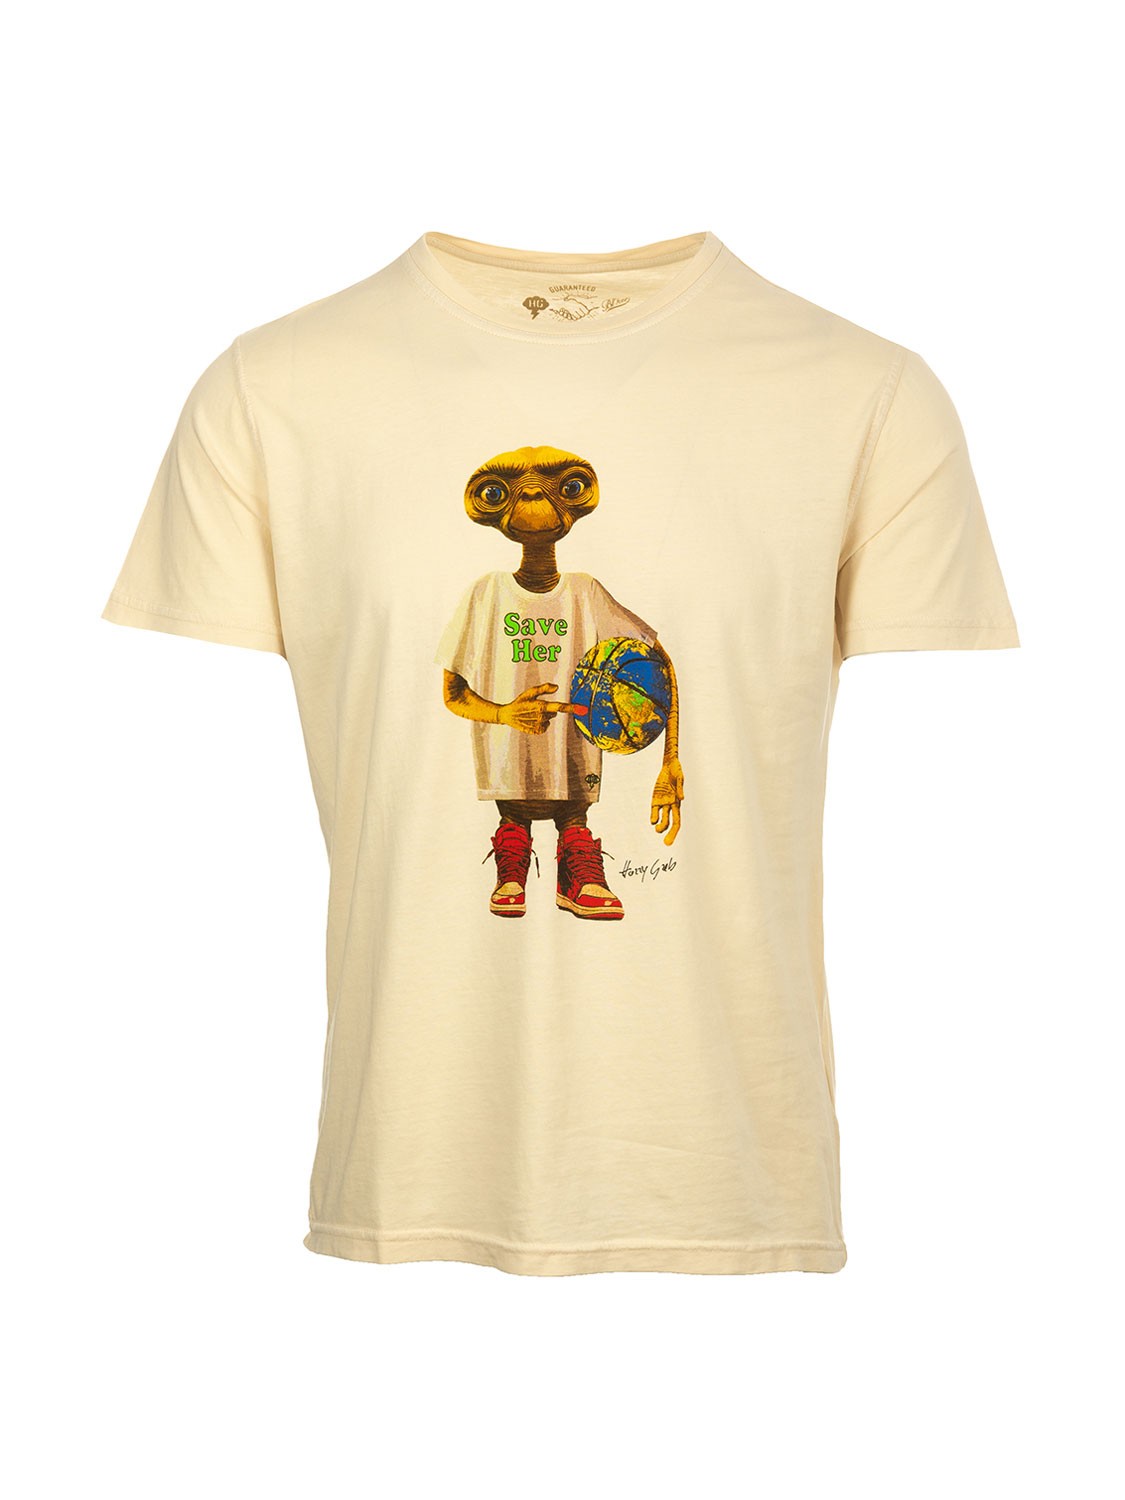 Bl'ker Men's T-shirt Graphic Save Her HG